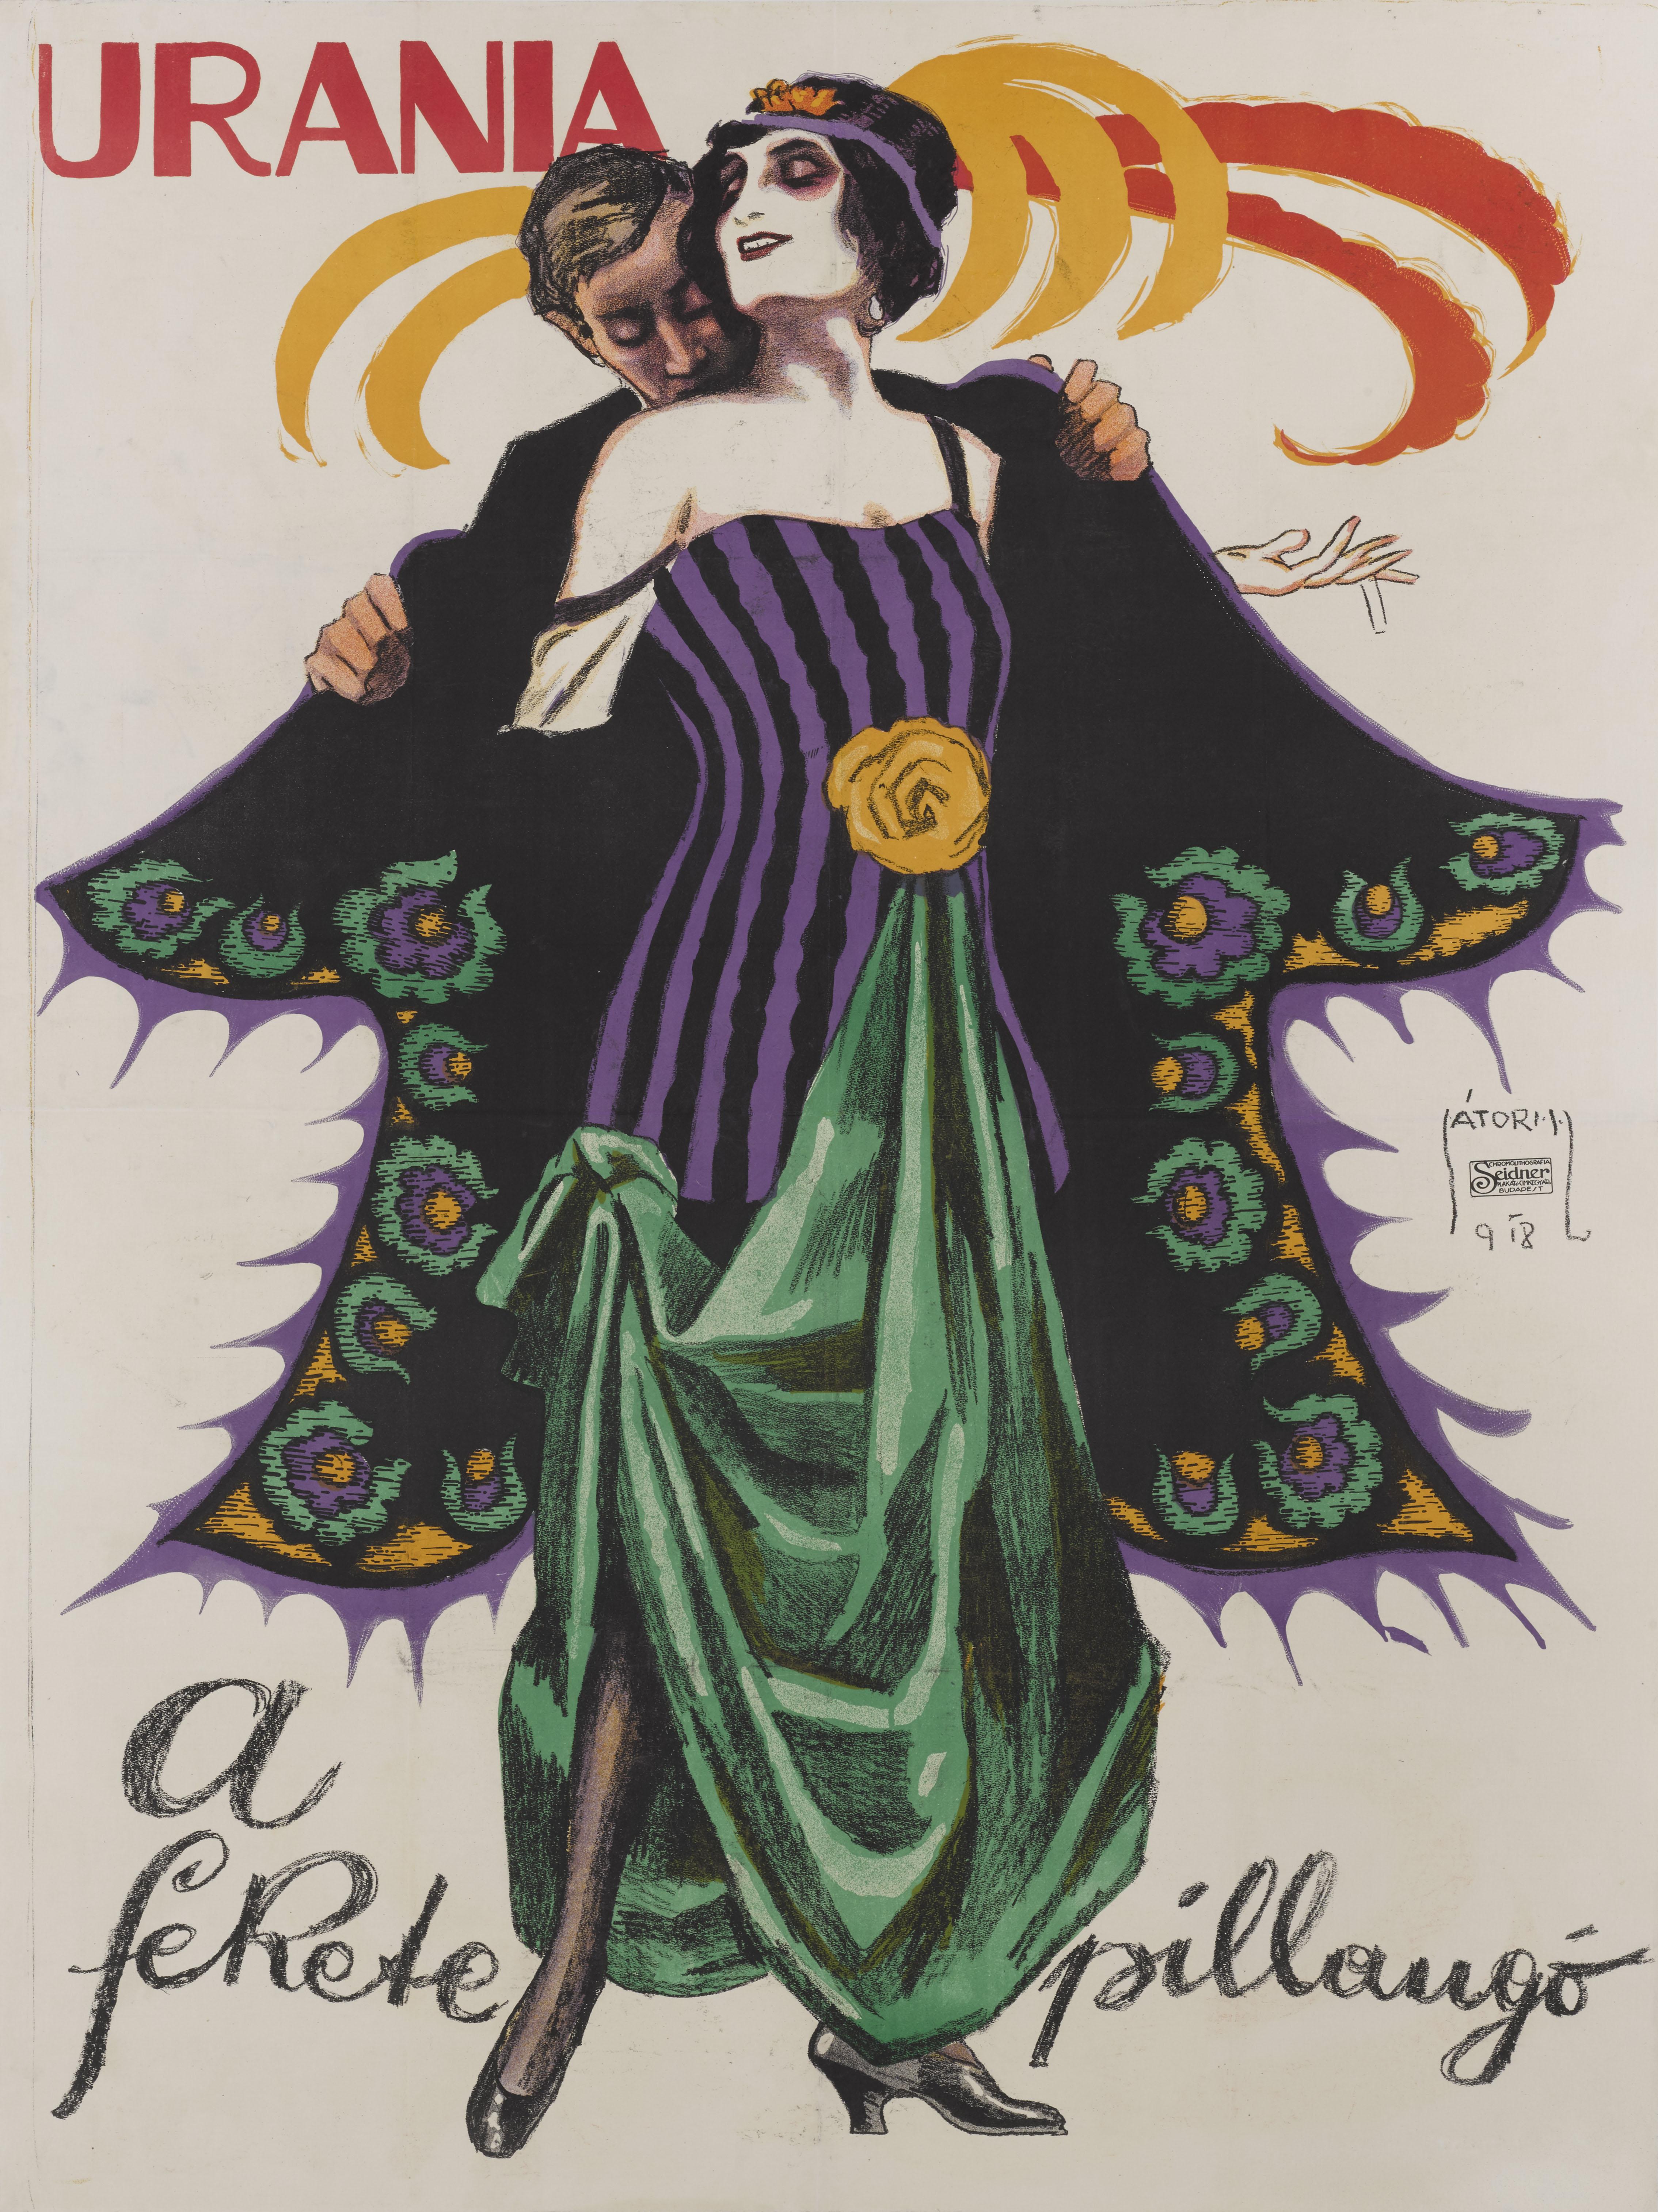 An incredibly rare original Hungarian film poster for the 1916 silent drama The Black Butterfly. This film was directed by Burton L. King and starred Olga Petrova, Mahlon Hamilton and Tony Merlo. The poster was designed by the Hungarian artist Lipot